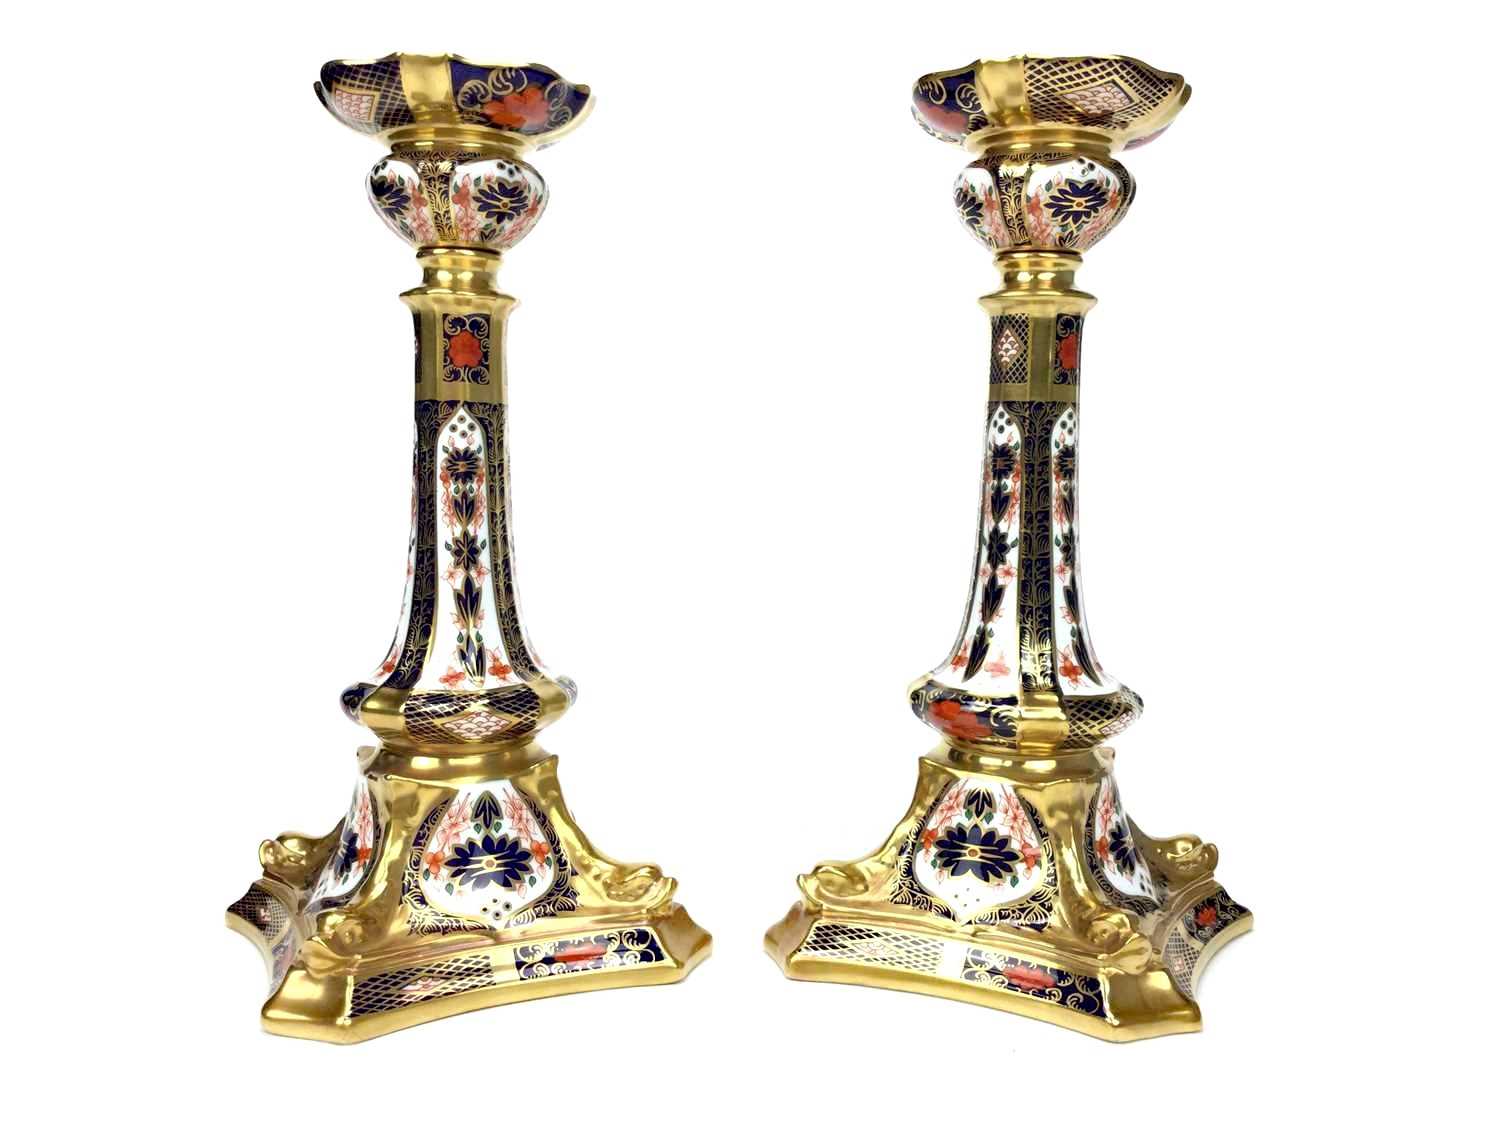 Lot 1234 - A PAIR OF ROYAL CROWN DERBY TABLE CANDLESTICKS